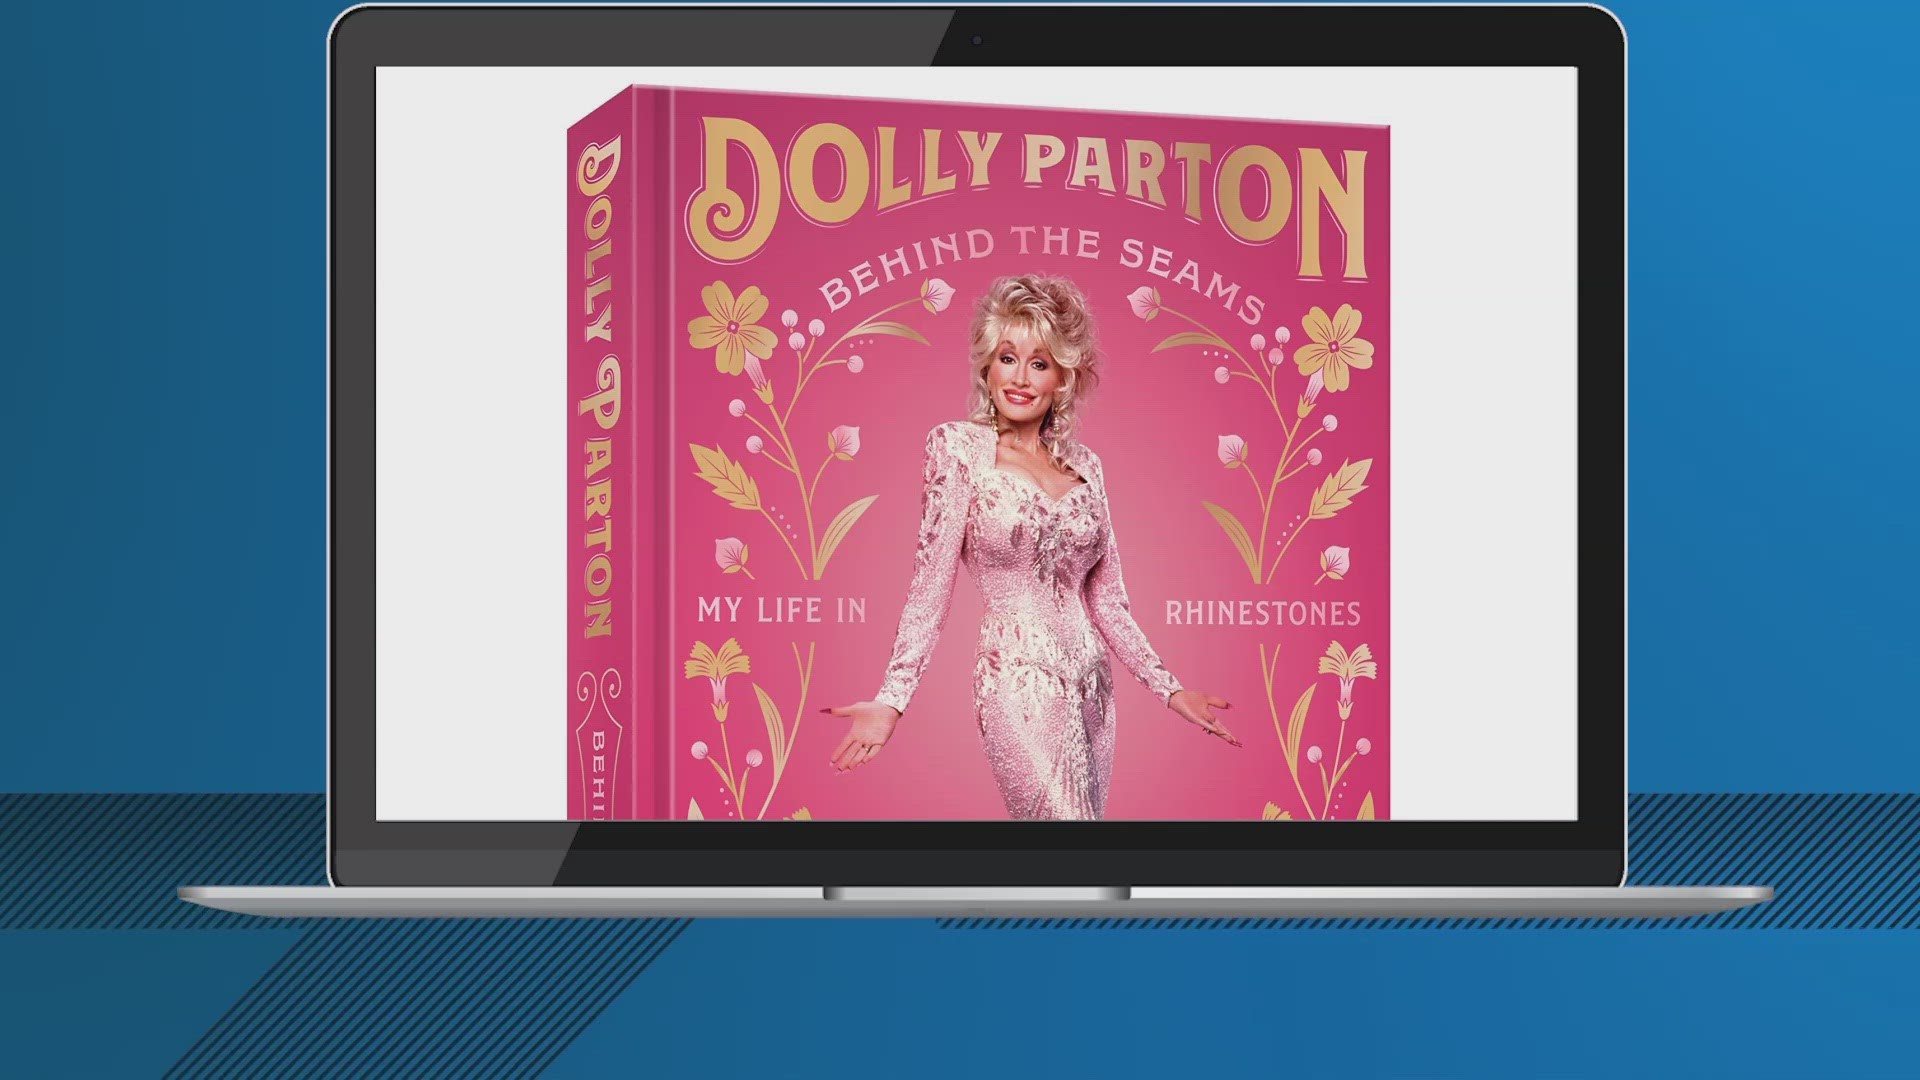 It's titled "Behind the Seams: My Life in Rhinestones" and will share personal stories from Dolly's life as well as feature more than 400 pictures.